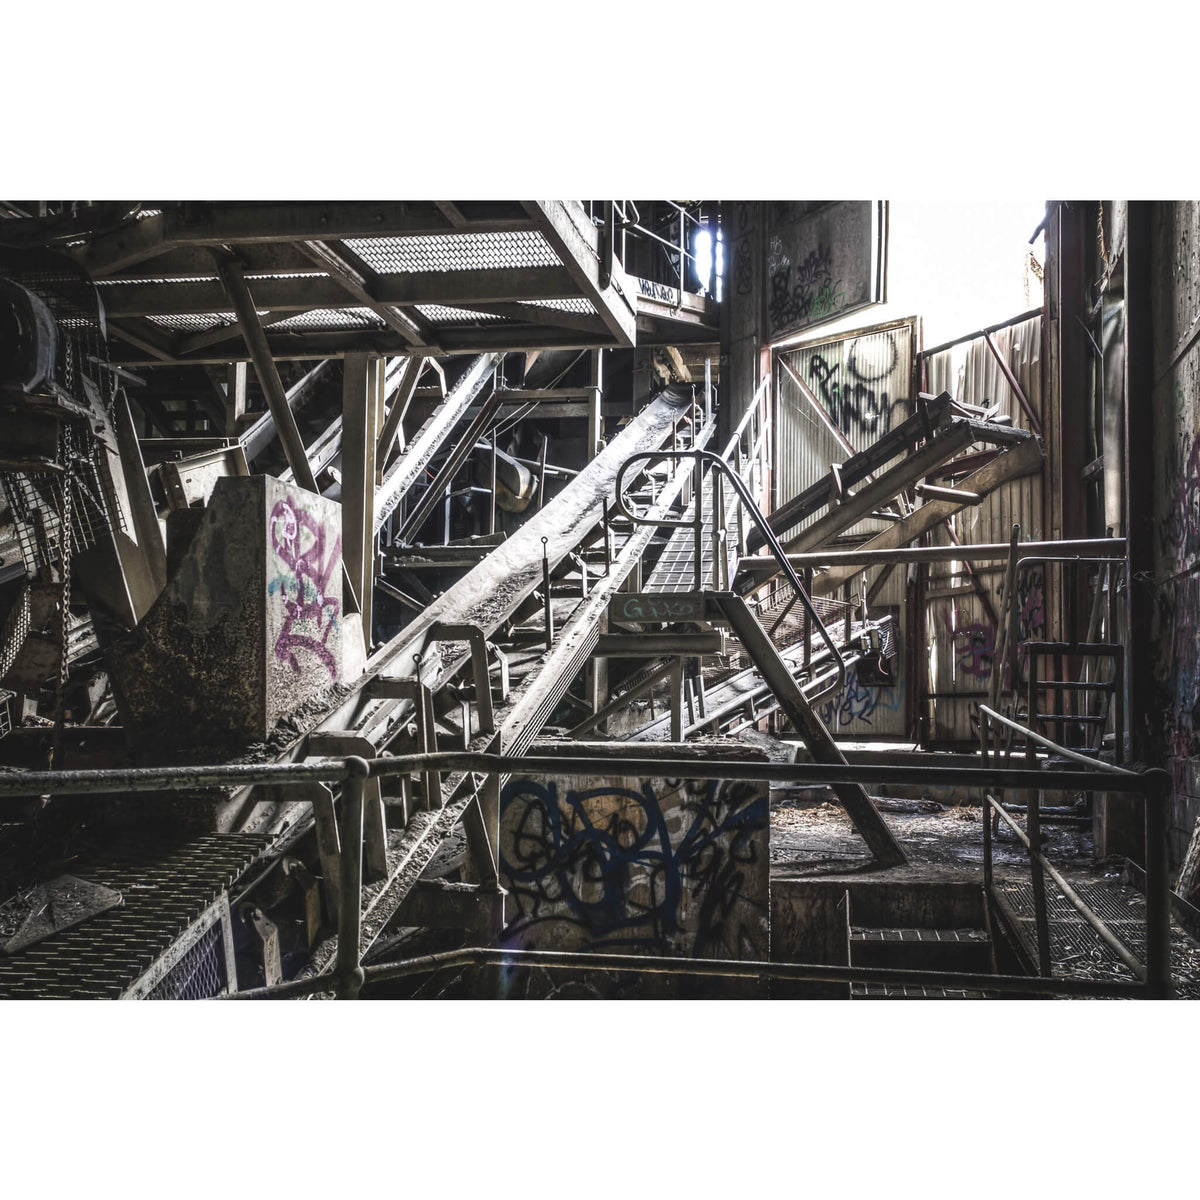 Screening Conveyor | Hornsby Quarry Fine Art Print - Lost Collective Shop